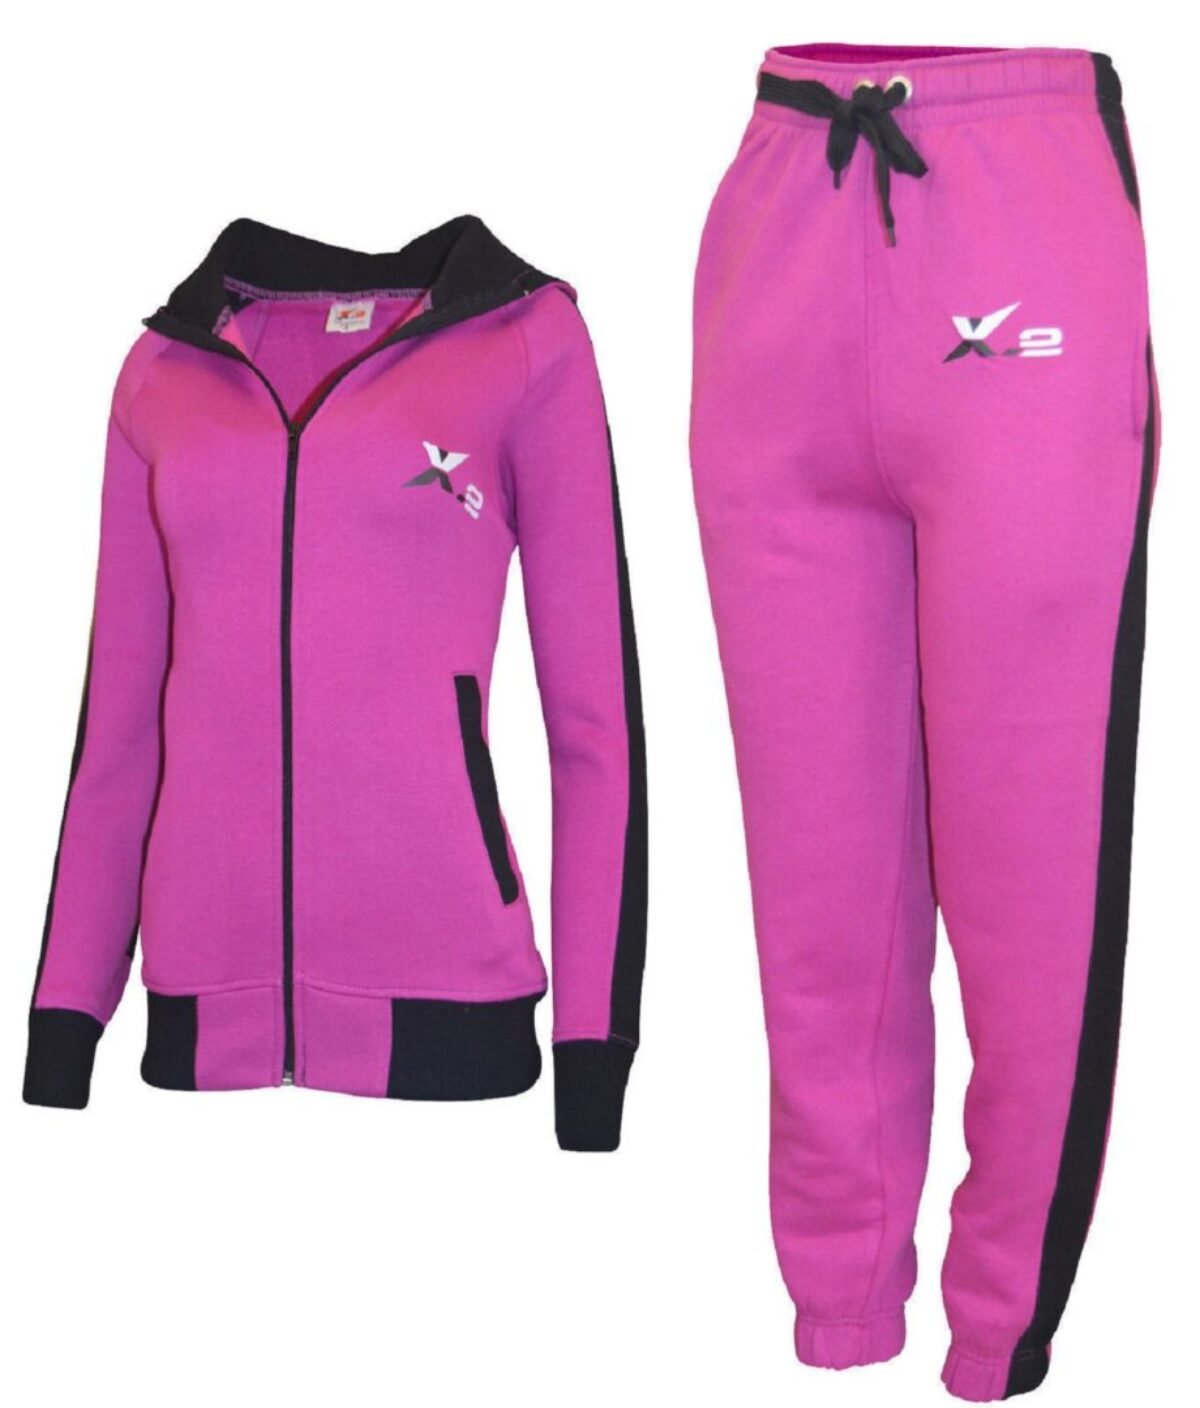 Ladies Track Suits Suppliers 18156050 - Wholesale Manufacturers